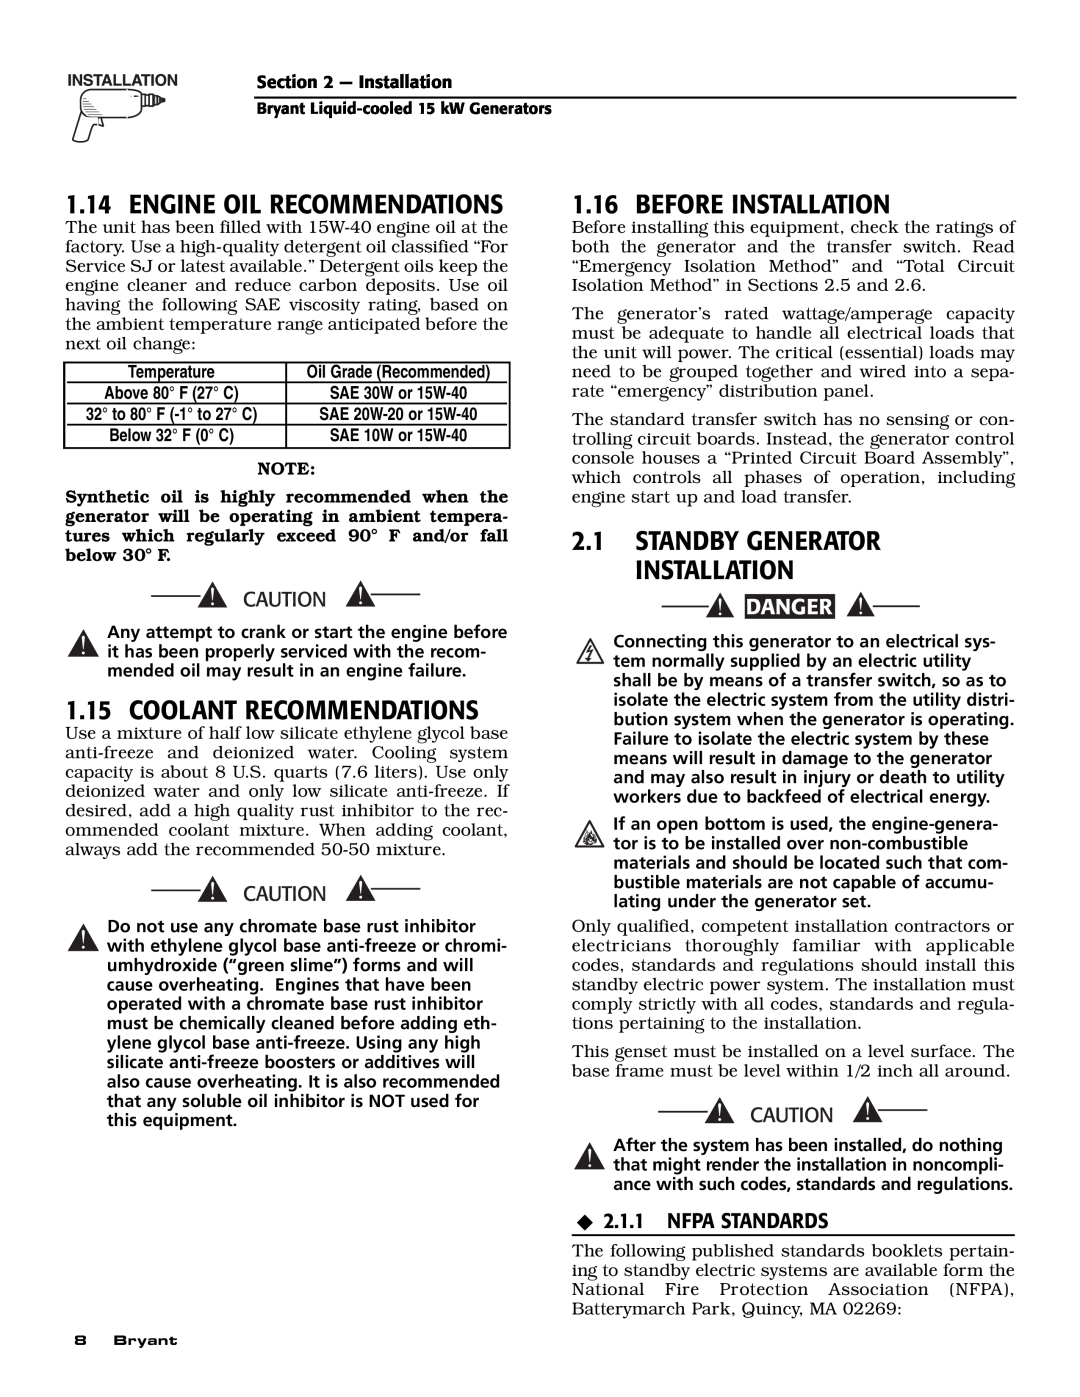 Bryant ASPAS1BBL015 Engine Oil Recommendations, Coolant Recommendations, Before Installation, ‹2.1.1 NFPA STANDARDS 